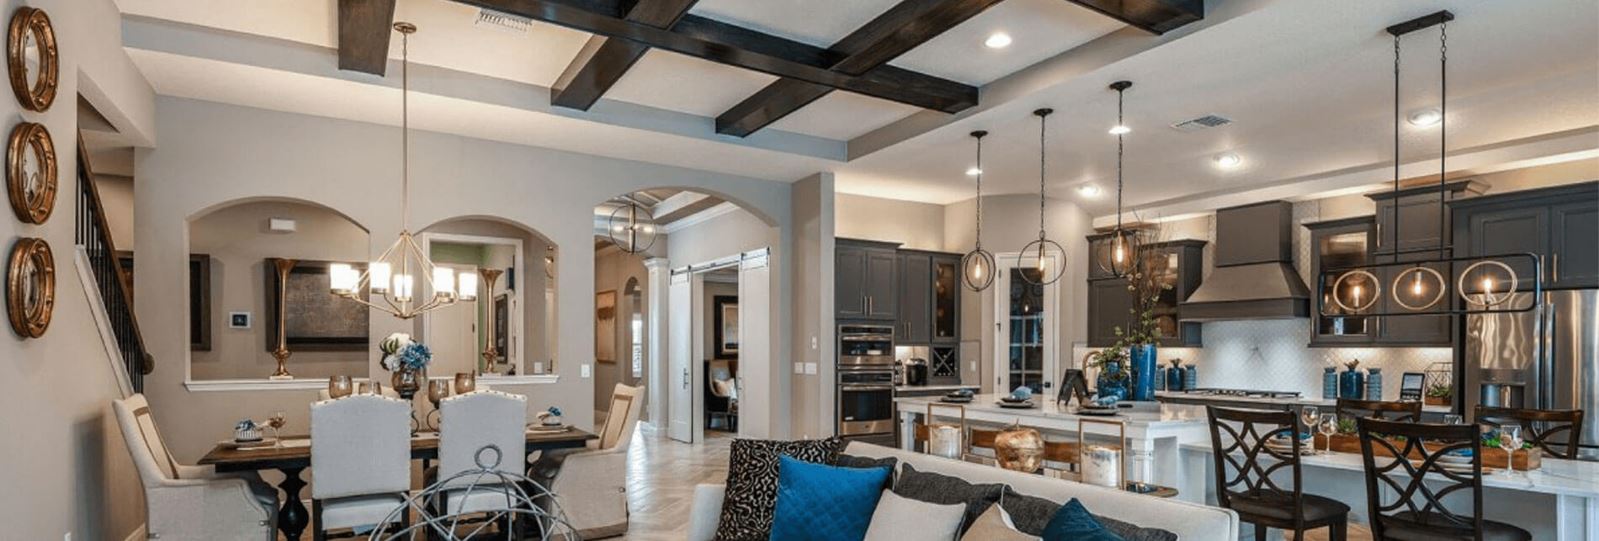 Great room in Bayshore II model home by Homes by WestBay in Bexley Land O Lakes, FL